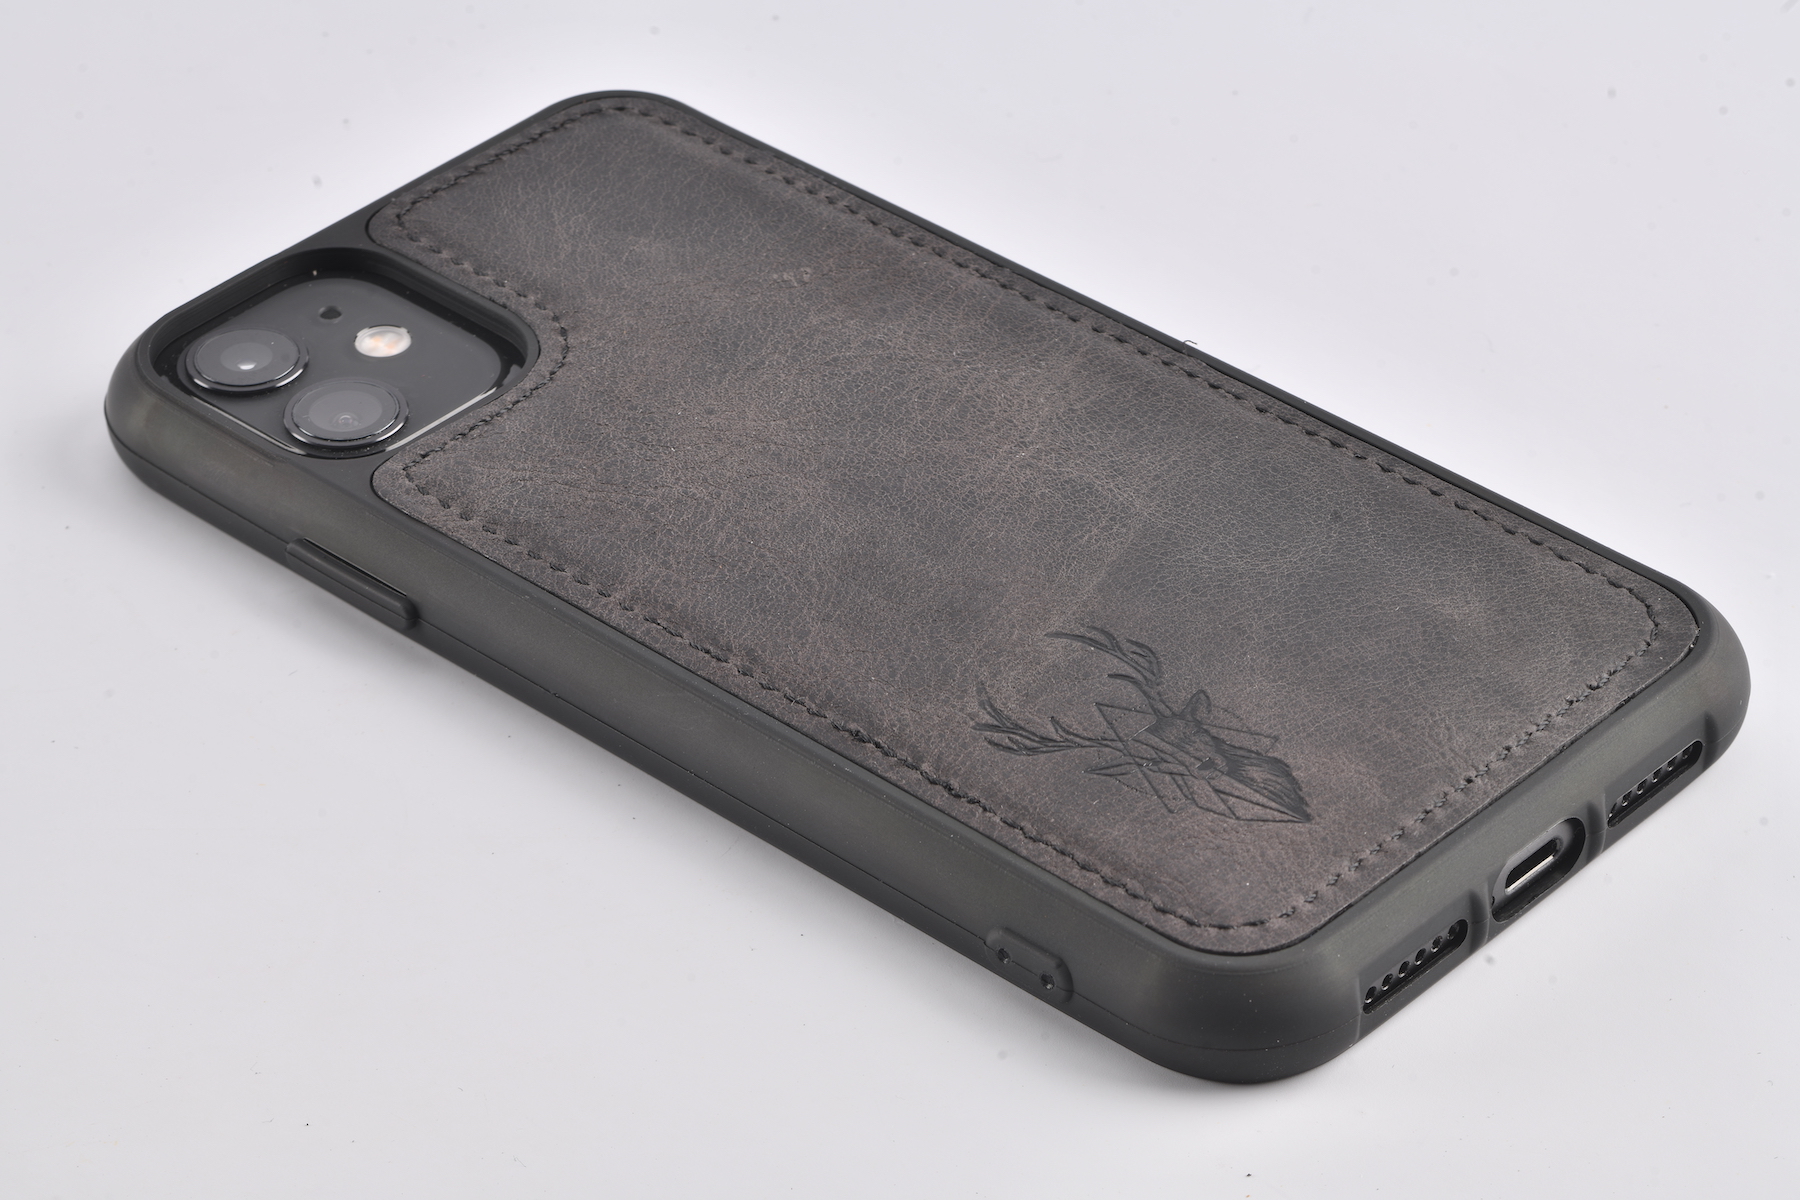 iPhone 11 Pro Max Case - Space Gray